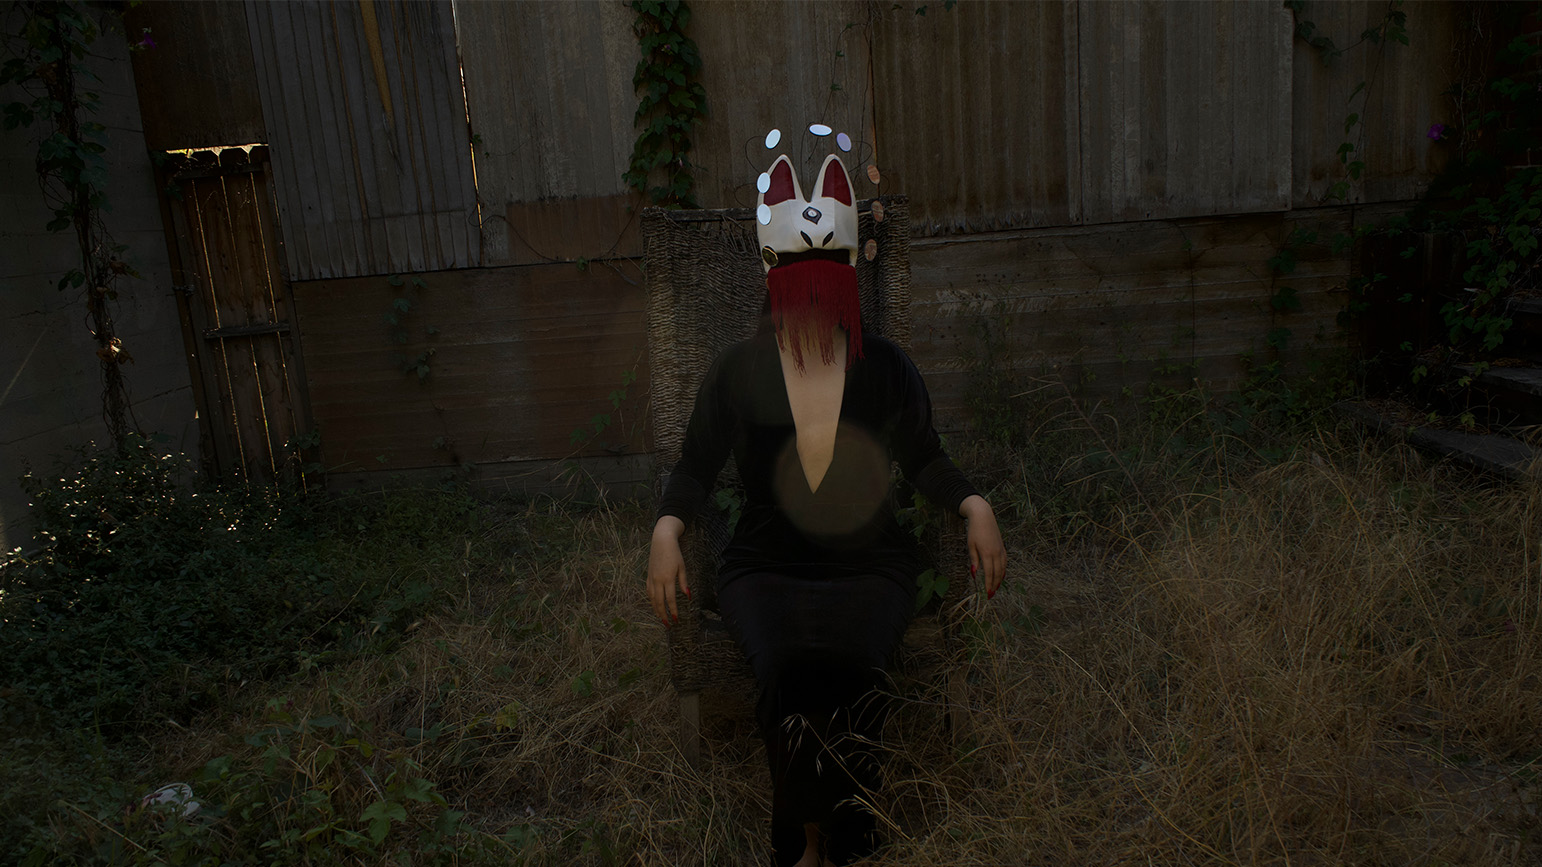 Still from a video showing a masked figured in a darkened fenced in area